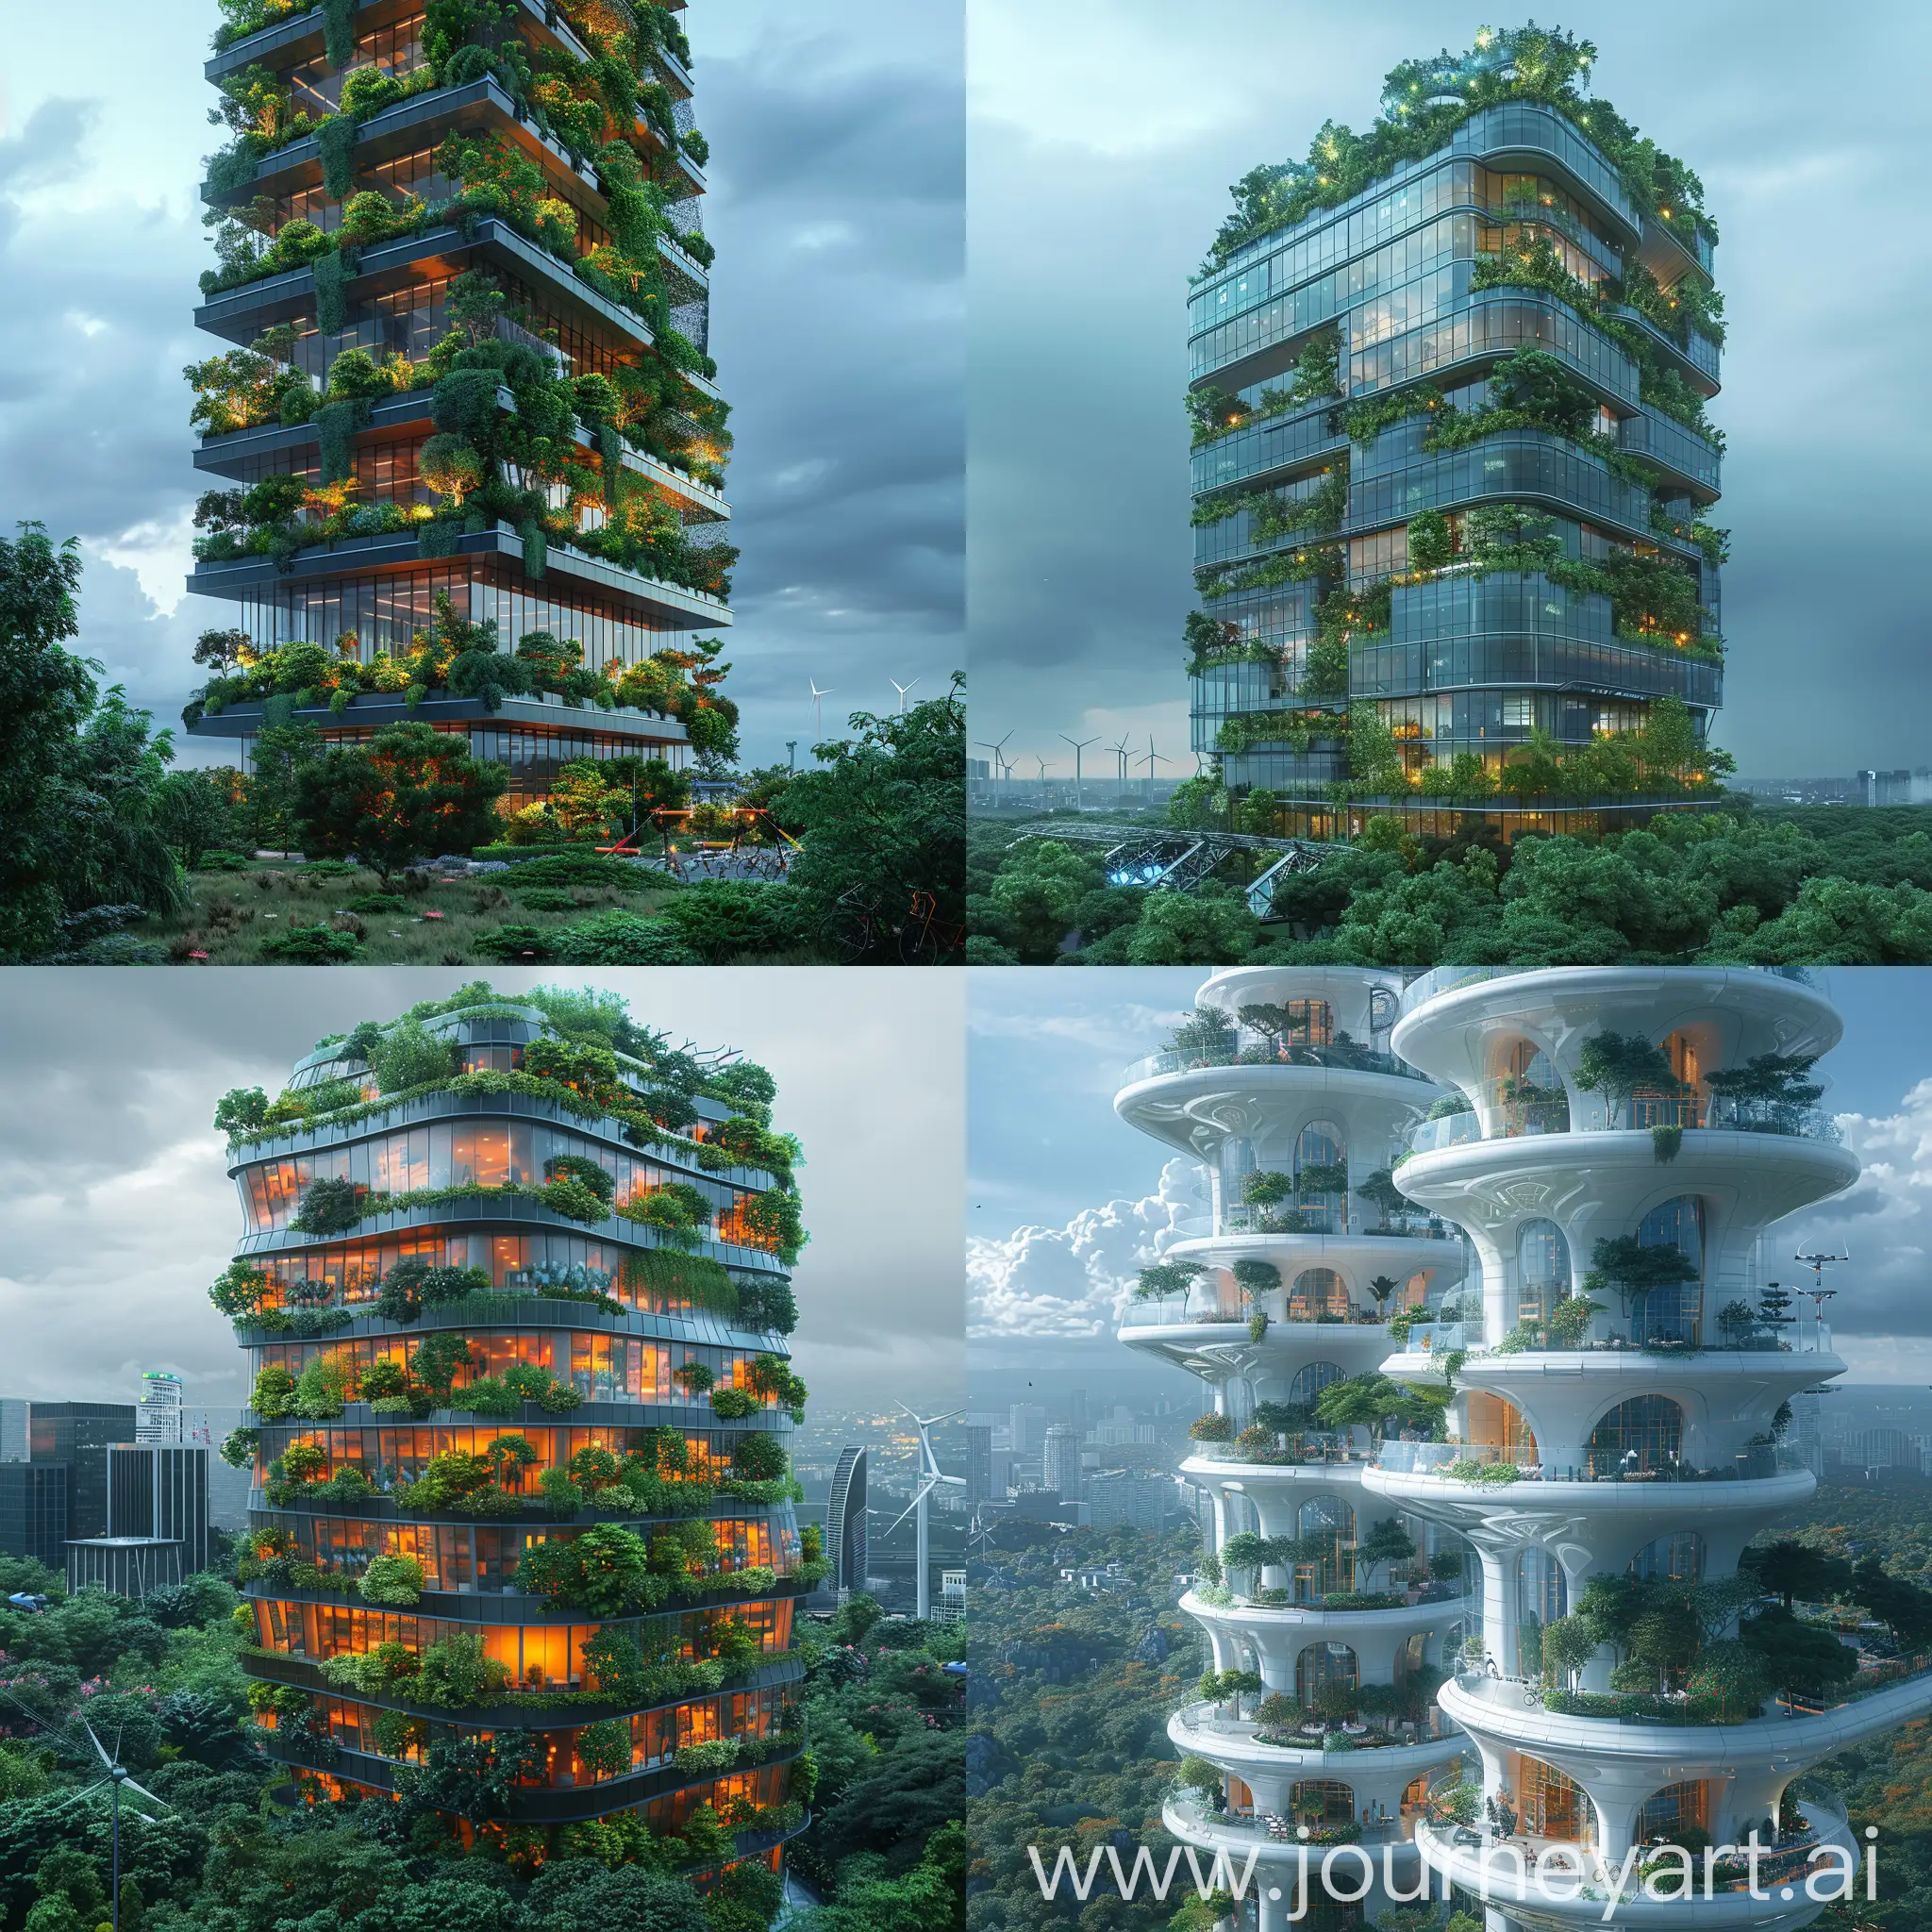 Futuristic-Smart-Skyscraper-with-Vertical-Gardens-and-Holographic-Displays